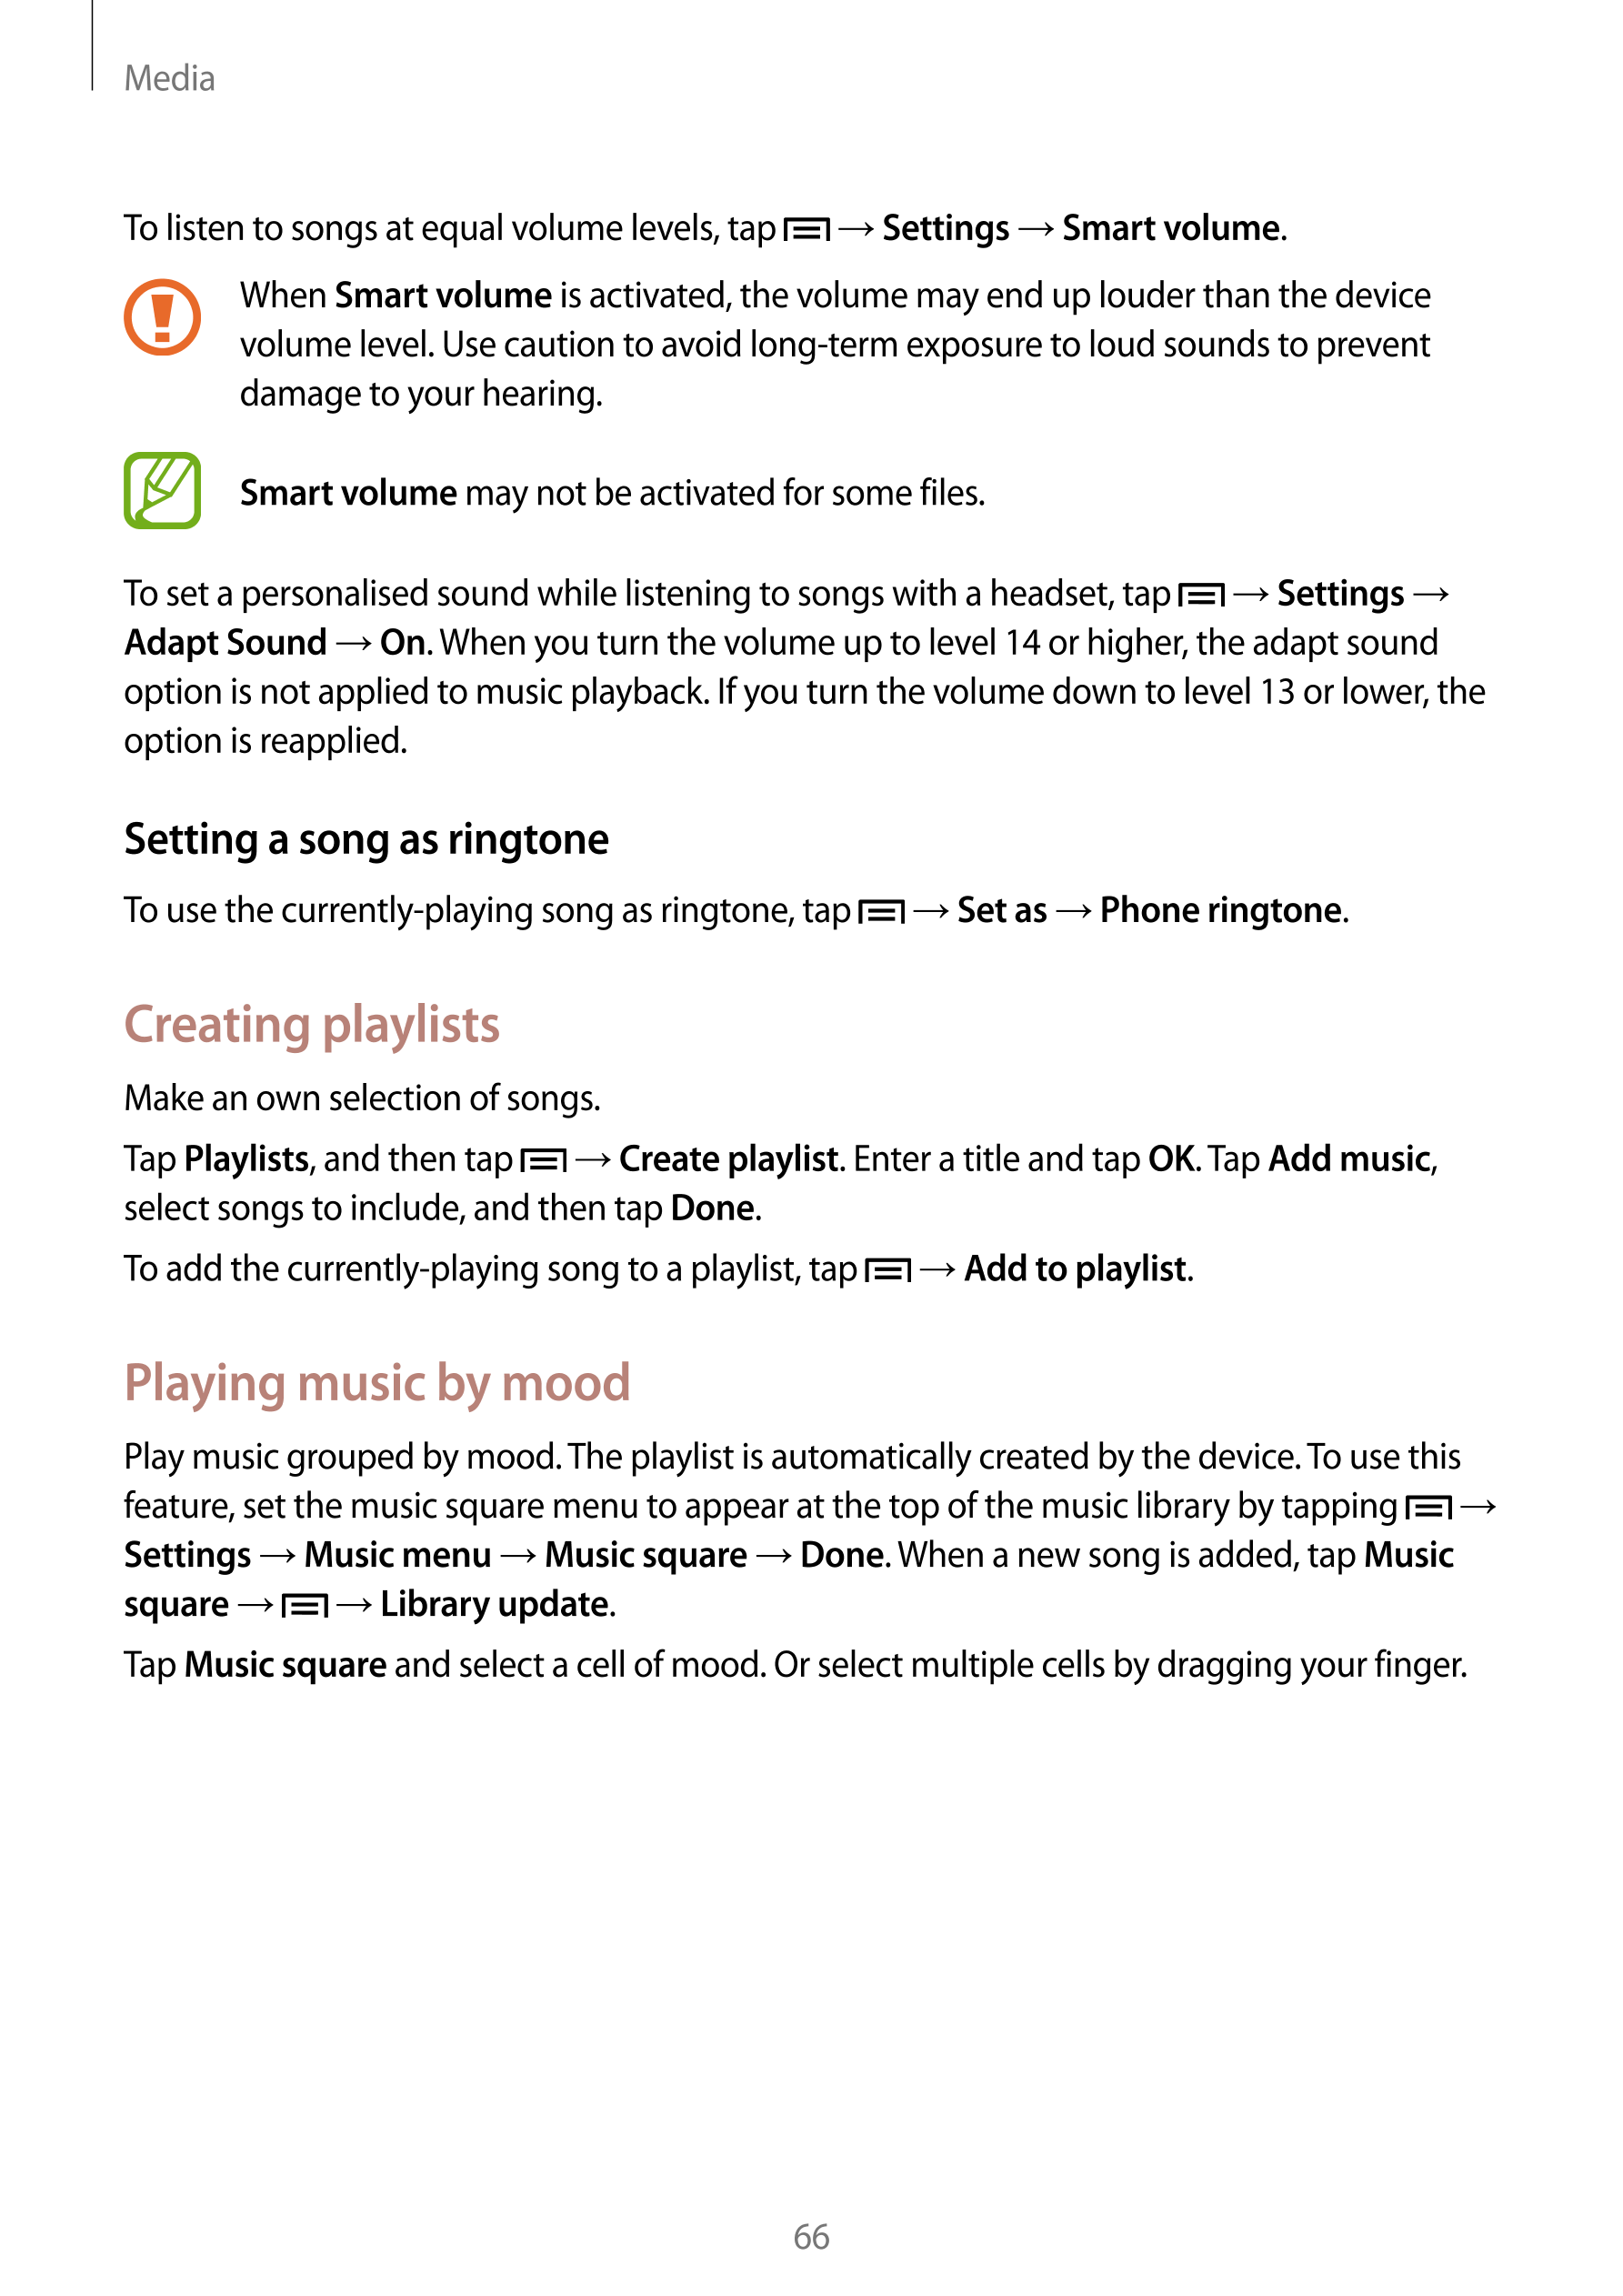 Media
To listen to songs at equal volume levels, tap    →  Settings  →  Smart volume.
When  Smart volume is activated, the volum